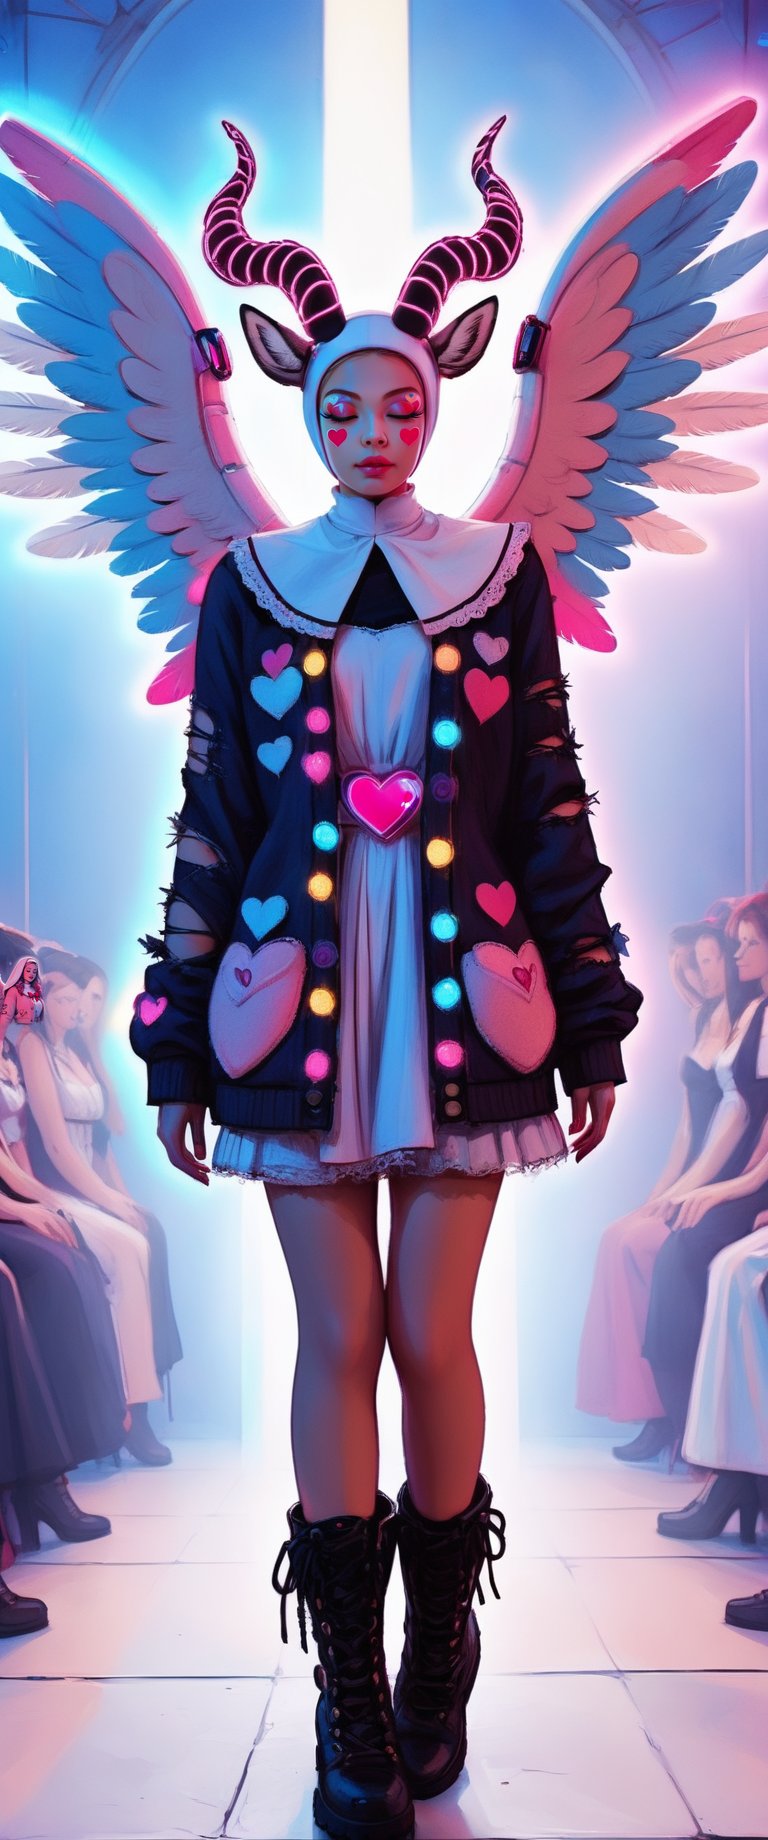 Here is the prompt:

A serene angelic nun stands amidst a vortex of volumetric and chiaroscuro lighting, her big power armor-clad physique radiating an aura of strength. Her helmeted head gazes downwards, her eyes closed in deep contemplation. Twin black wings with red trim unfold from behind, their intricate details illuminated by [glow]. A pastel-streaked pigtails adorned with bows and clips frame her face, while makeup features glitter and heart-shaped stickers. The surrounding environment is a vibrant Harajuku street, blending sweetness with a rebellious edge. The subject's outfit consists of a distressed pastel dress with lace, an oversized torn cardigan, chunky Combat boots, and solid lenses. A faint hint of darkness and light erodes the frame, setting the tone for this ultra-cute, grunge fashion-inspired portrait.